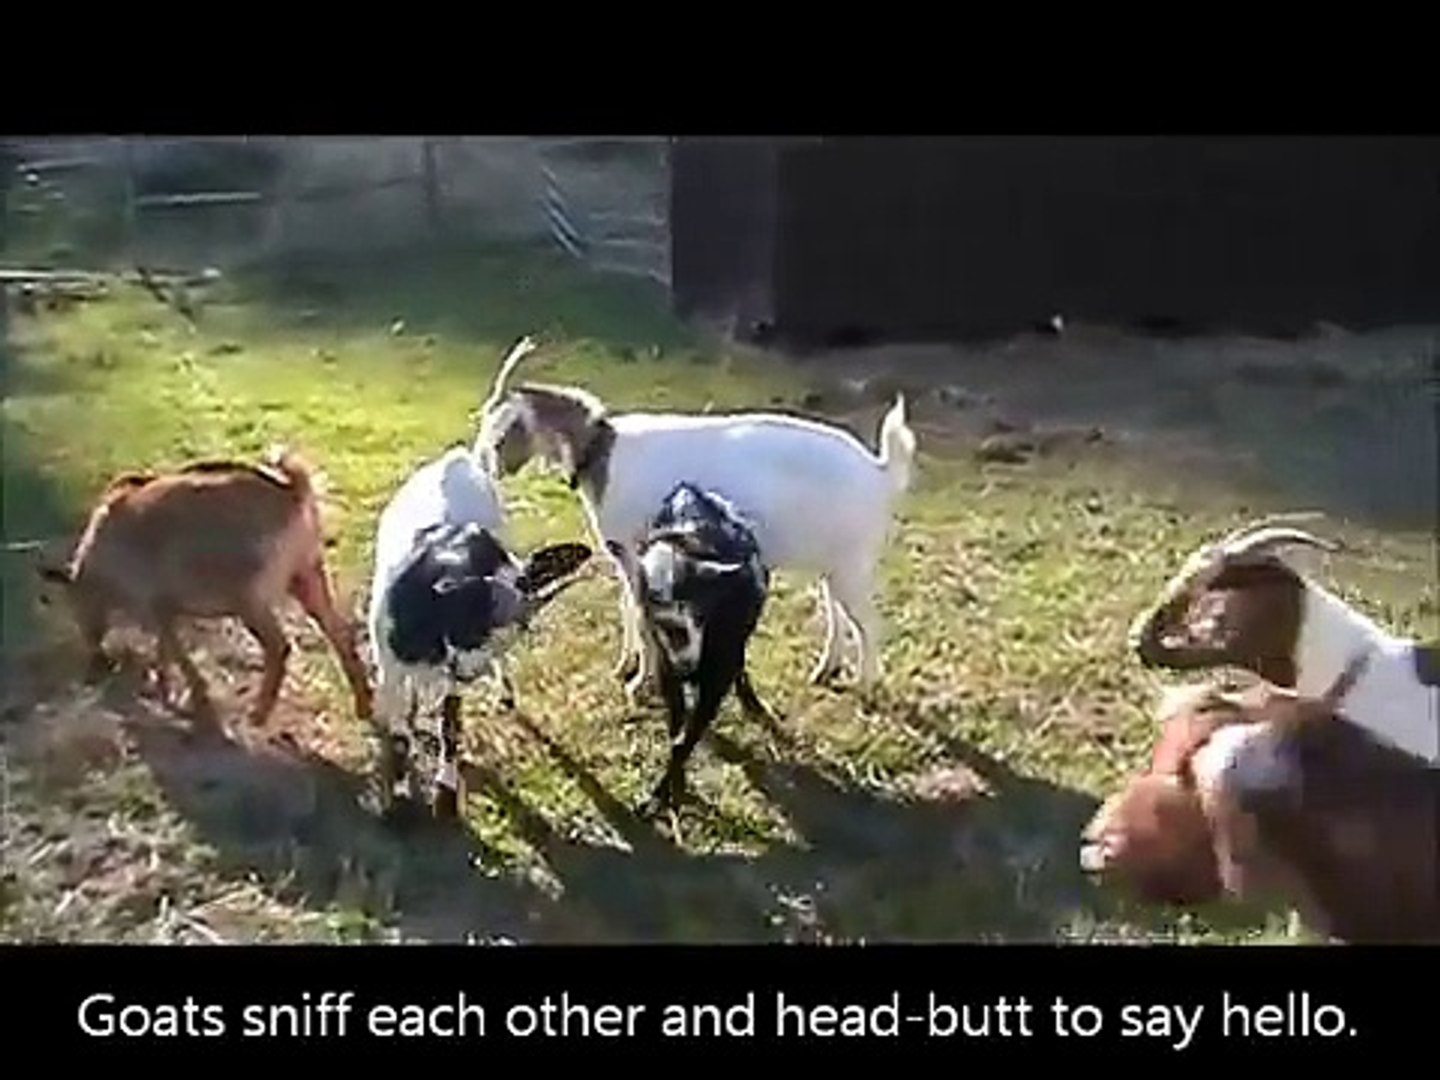 Goats get excited when new goats join the herd